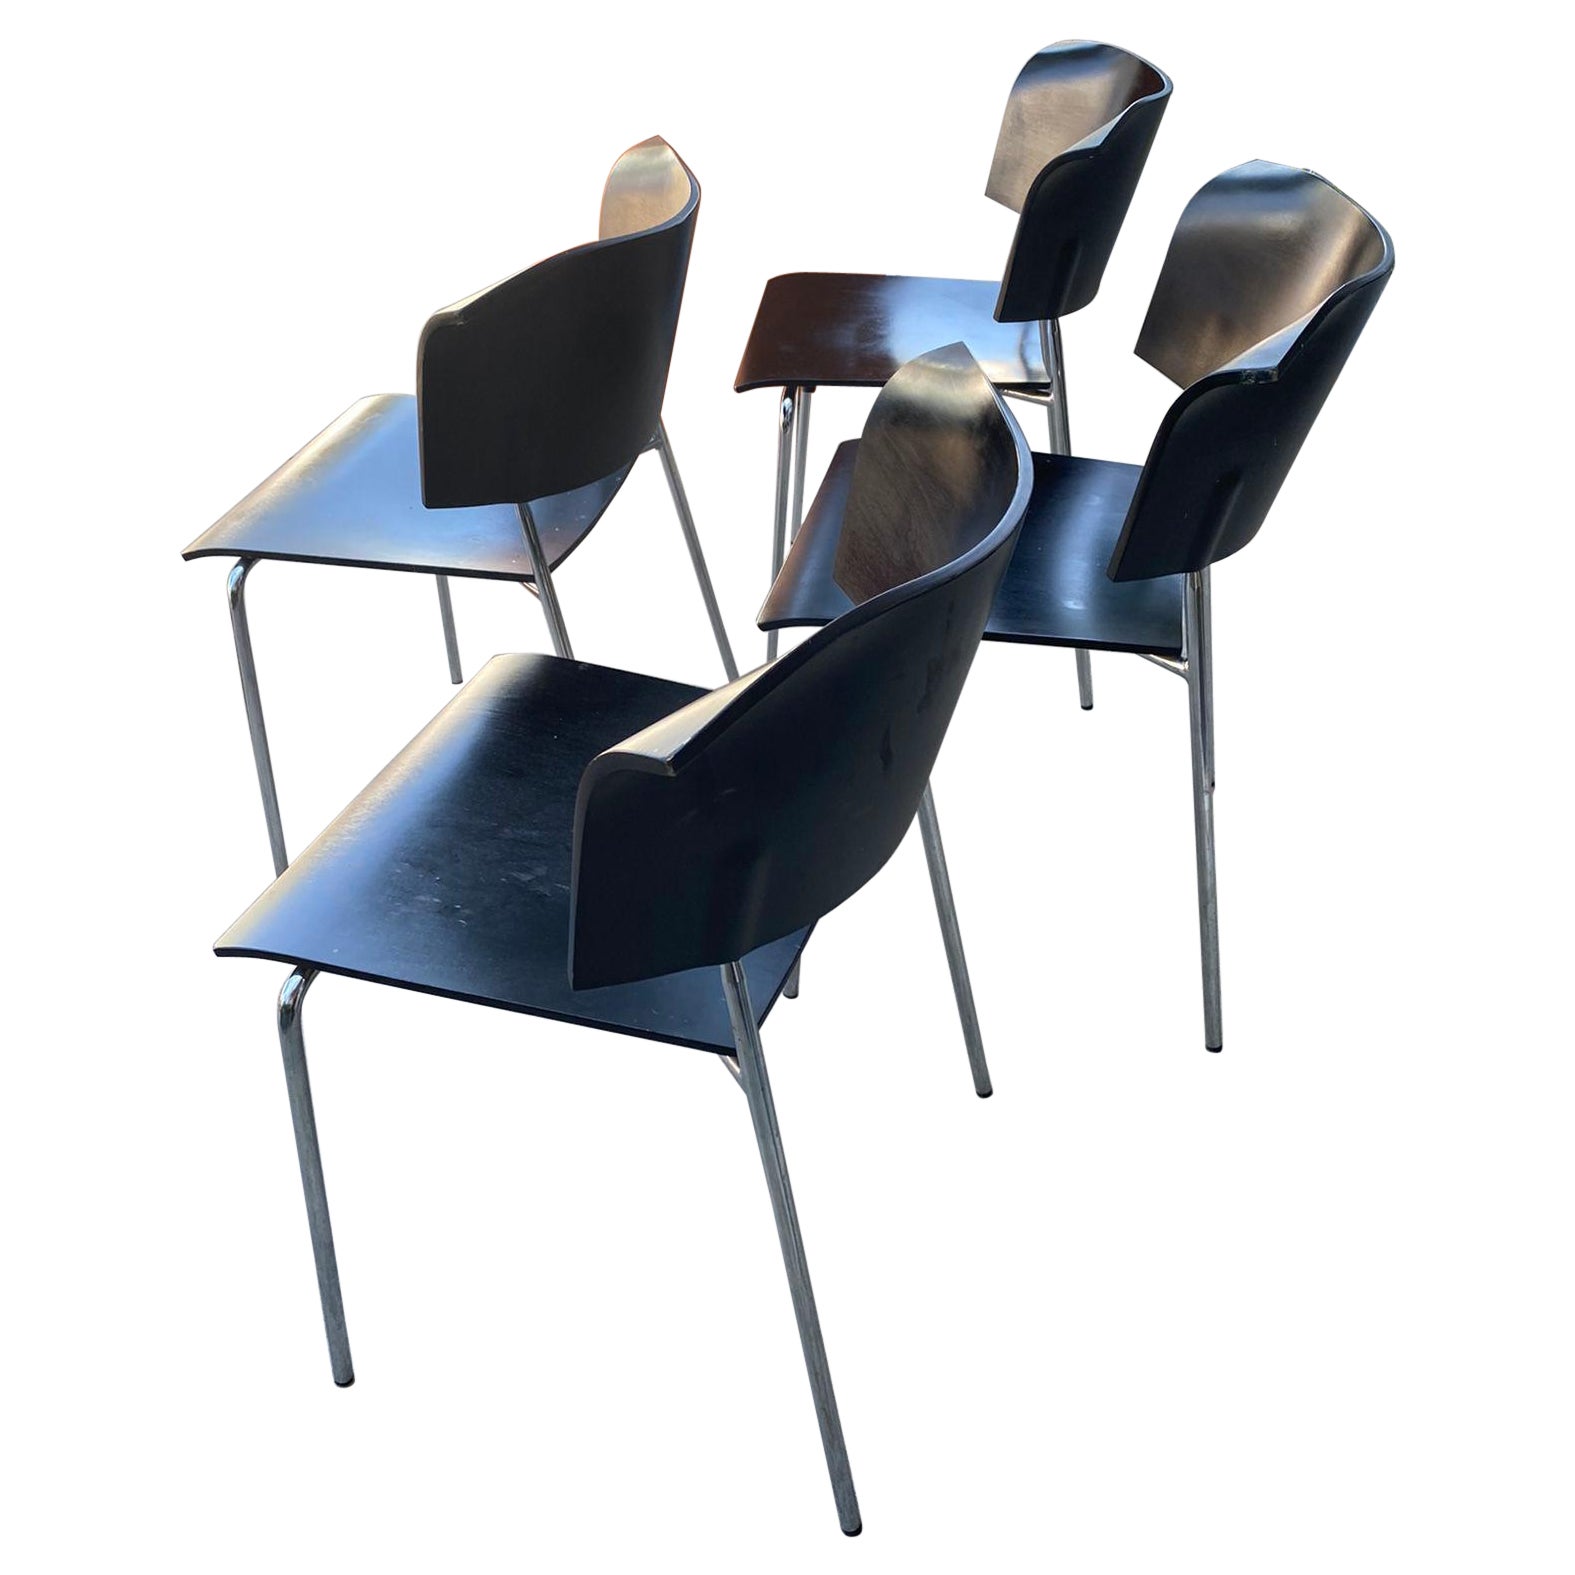 Post Modern 4 Swedish Stacking Chairs Black Wood with Chrome Steel Frame
Tons of flair, space saving compact.
Maker stamp designer ICF group, made in Sweden.
Lammhults Campus design by Johannes Foersom and Peter Hiort Lorenzen 1992
30T x 16W x 18D